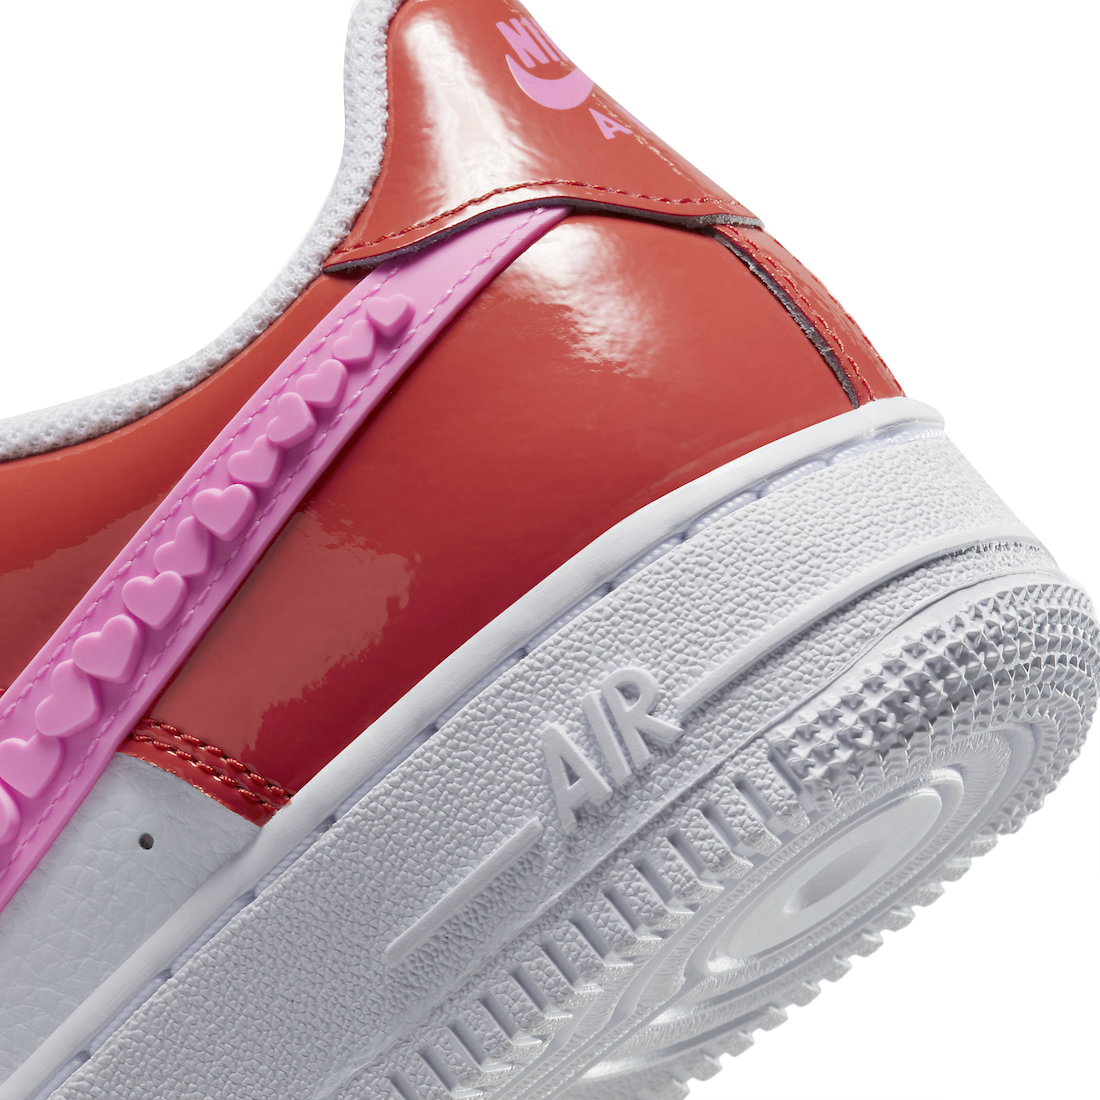 Feel the Love With Nike's “Valentine” Air Force 1 Low